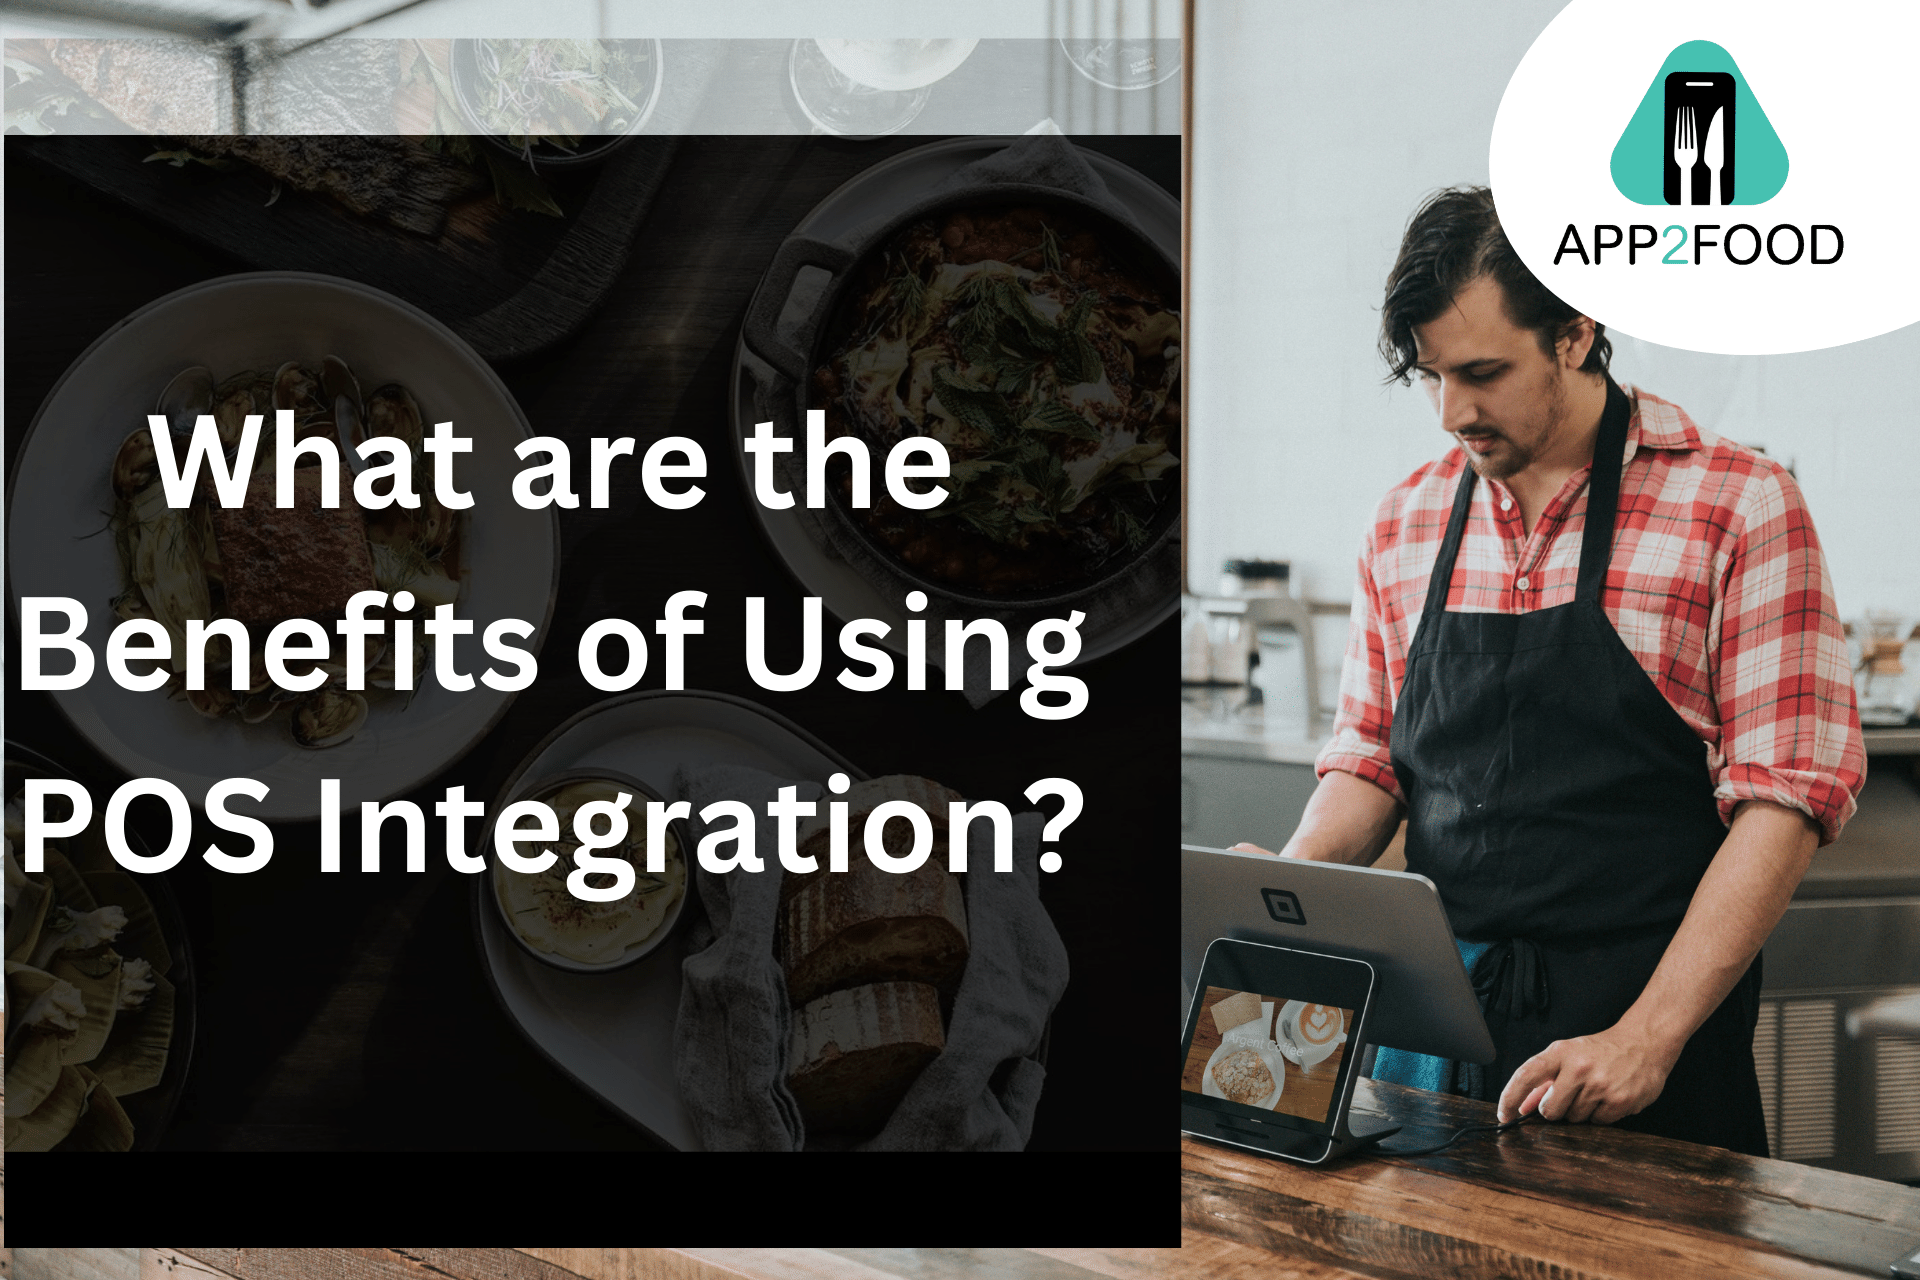 What are the Benefits of Using POS Integration?